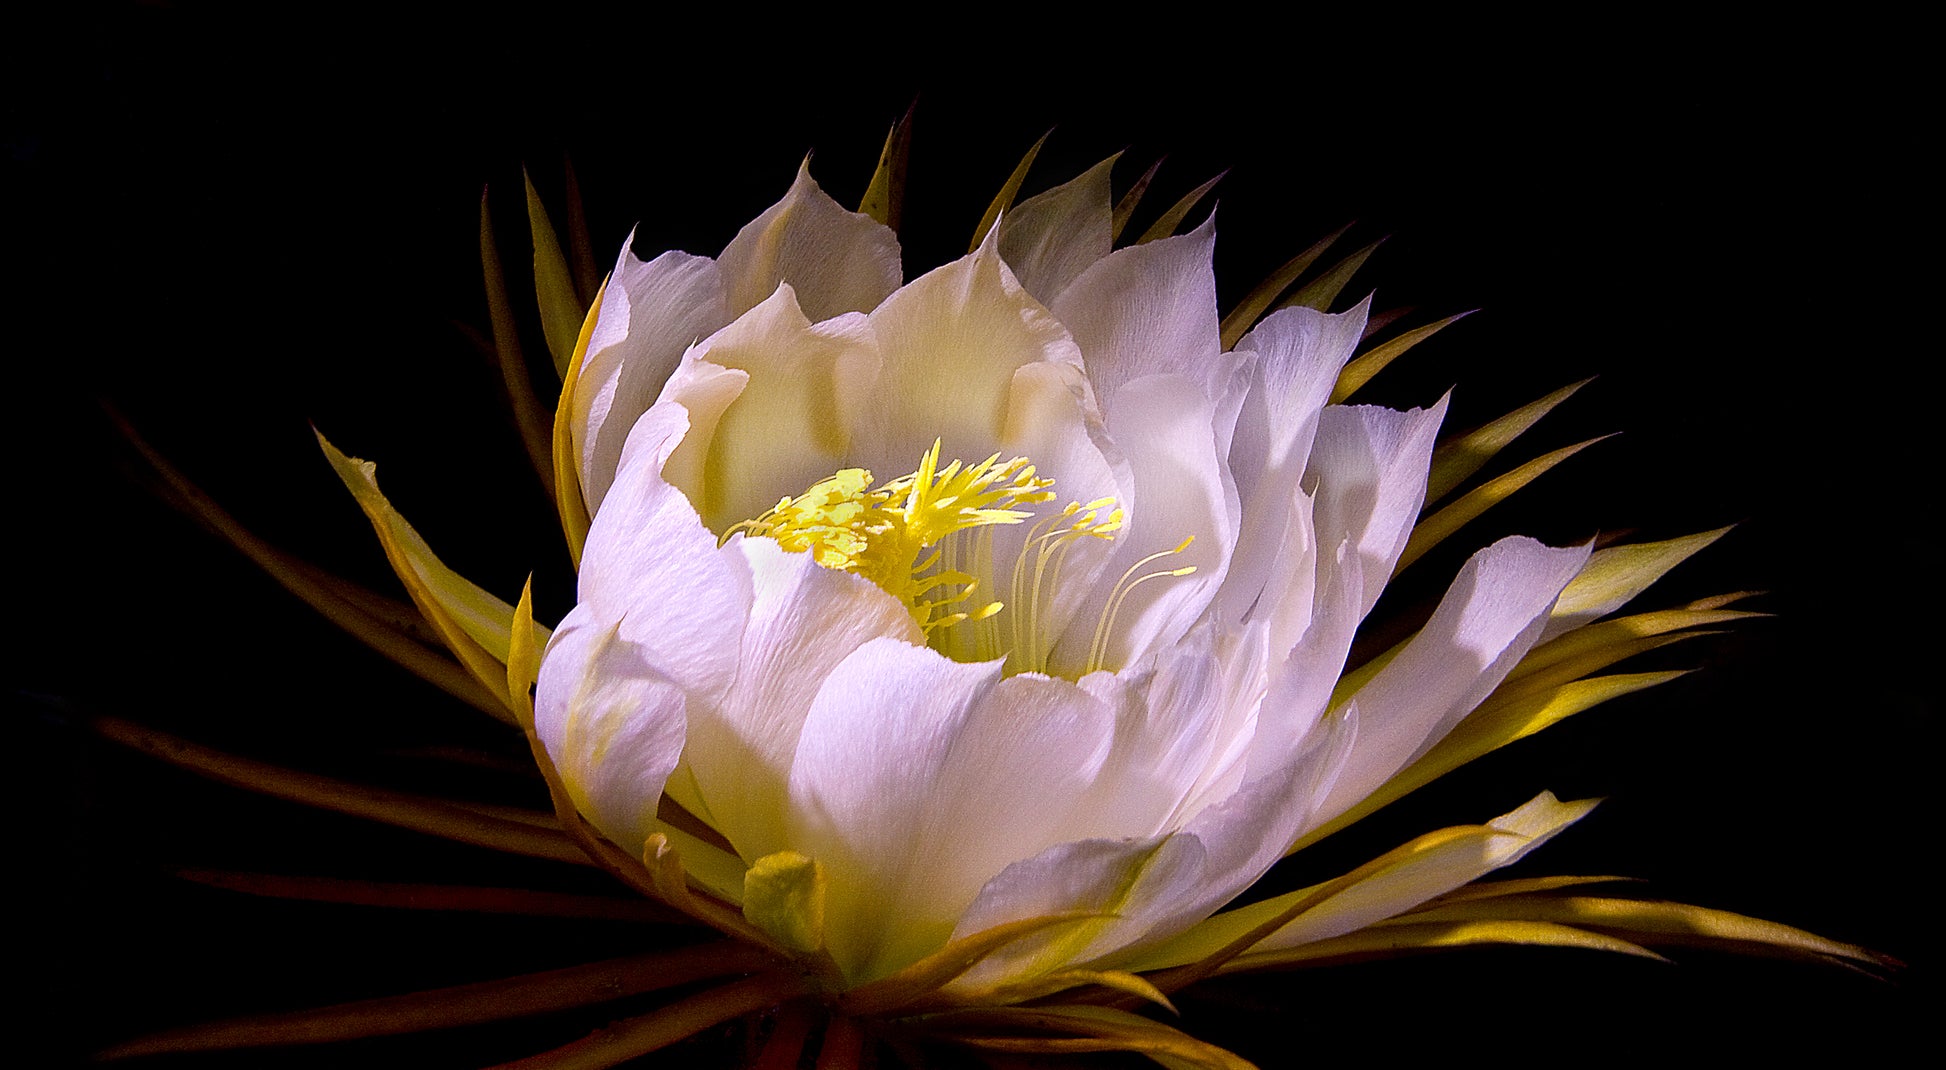 The Night Blooming Cereus, a soft white flower with yellow accents, is the subject of this fine art nature photograph by Kauai’s Inspiring Images Hawaii.